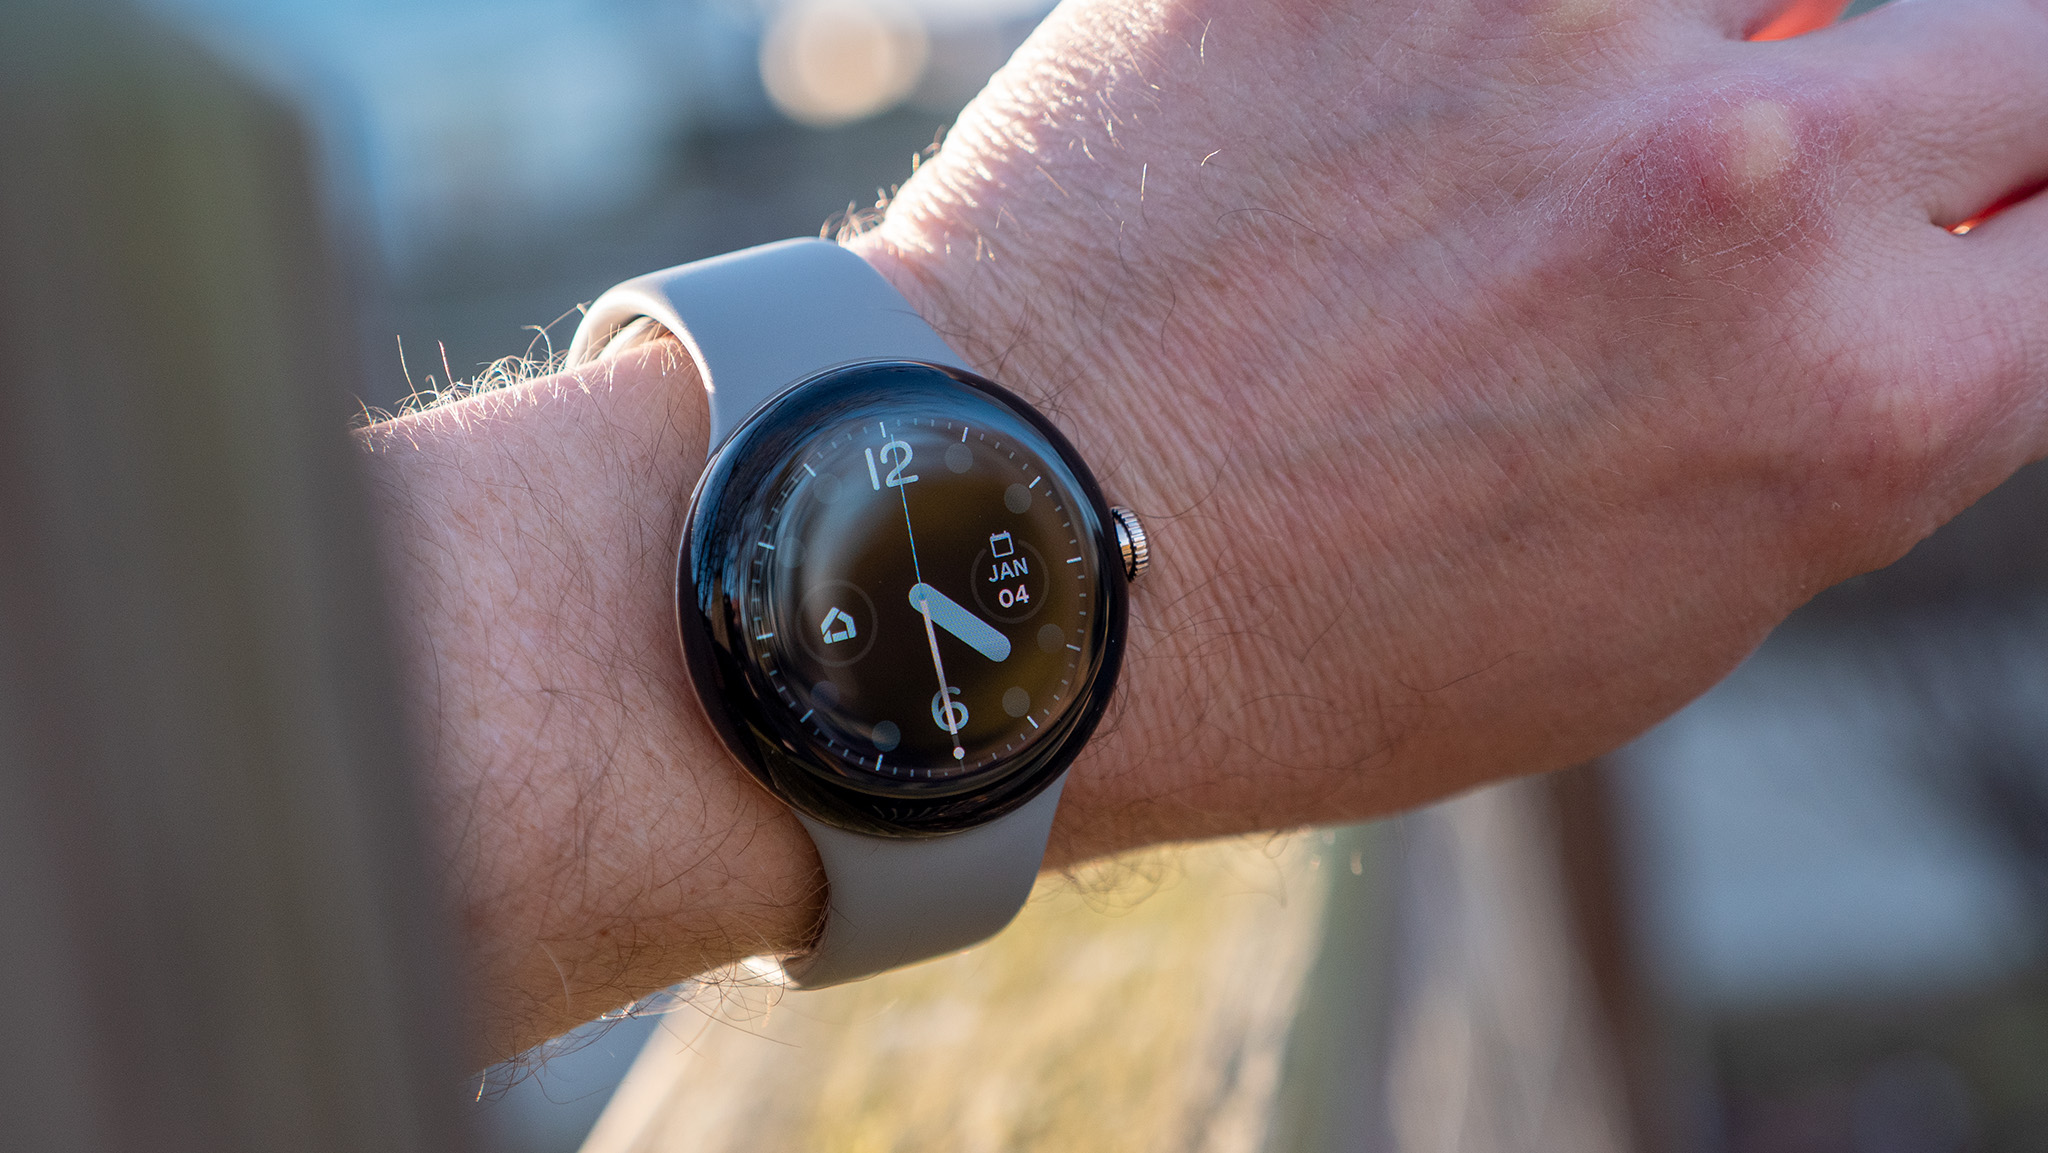 The Pacific watch face on a Google Pixel Watch